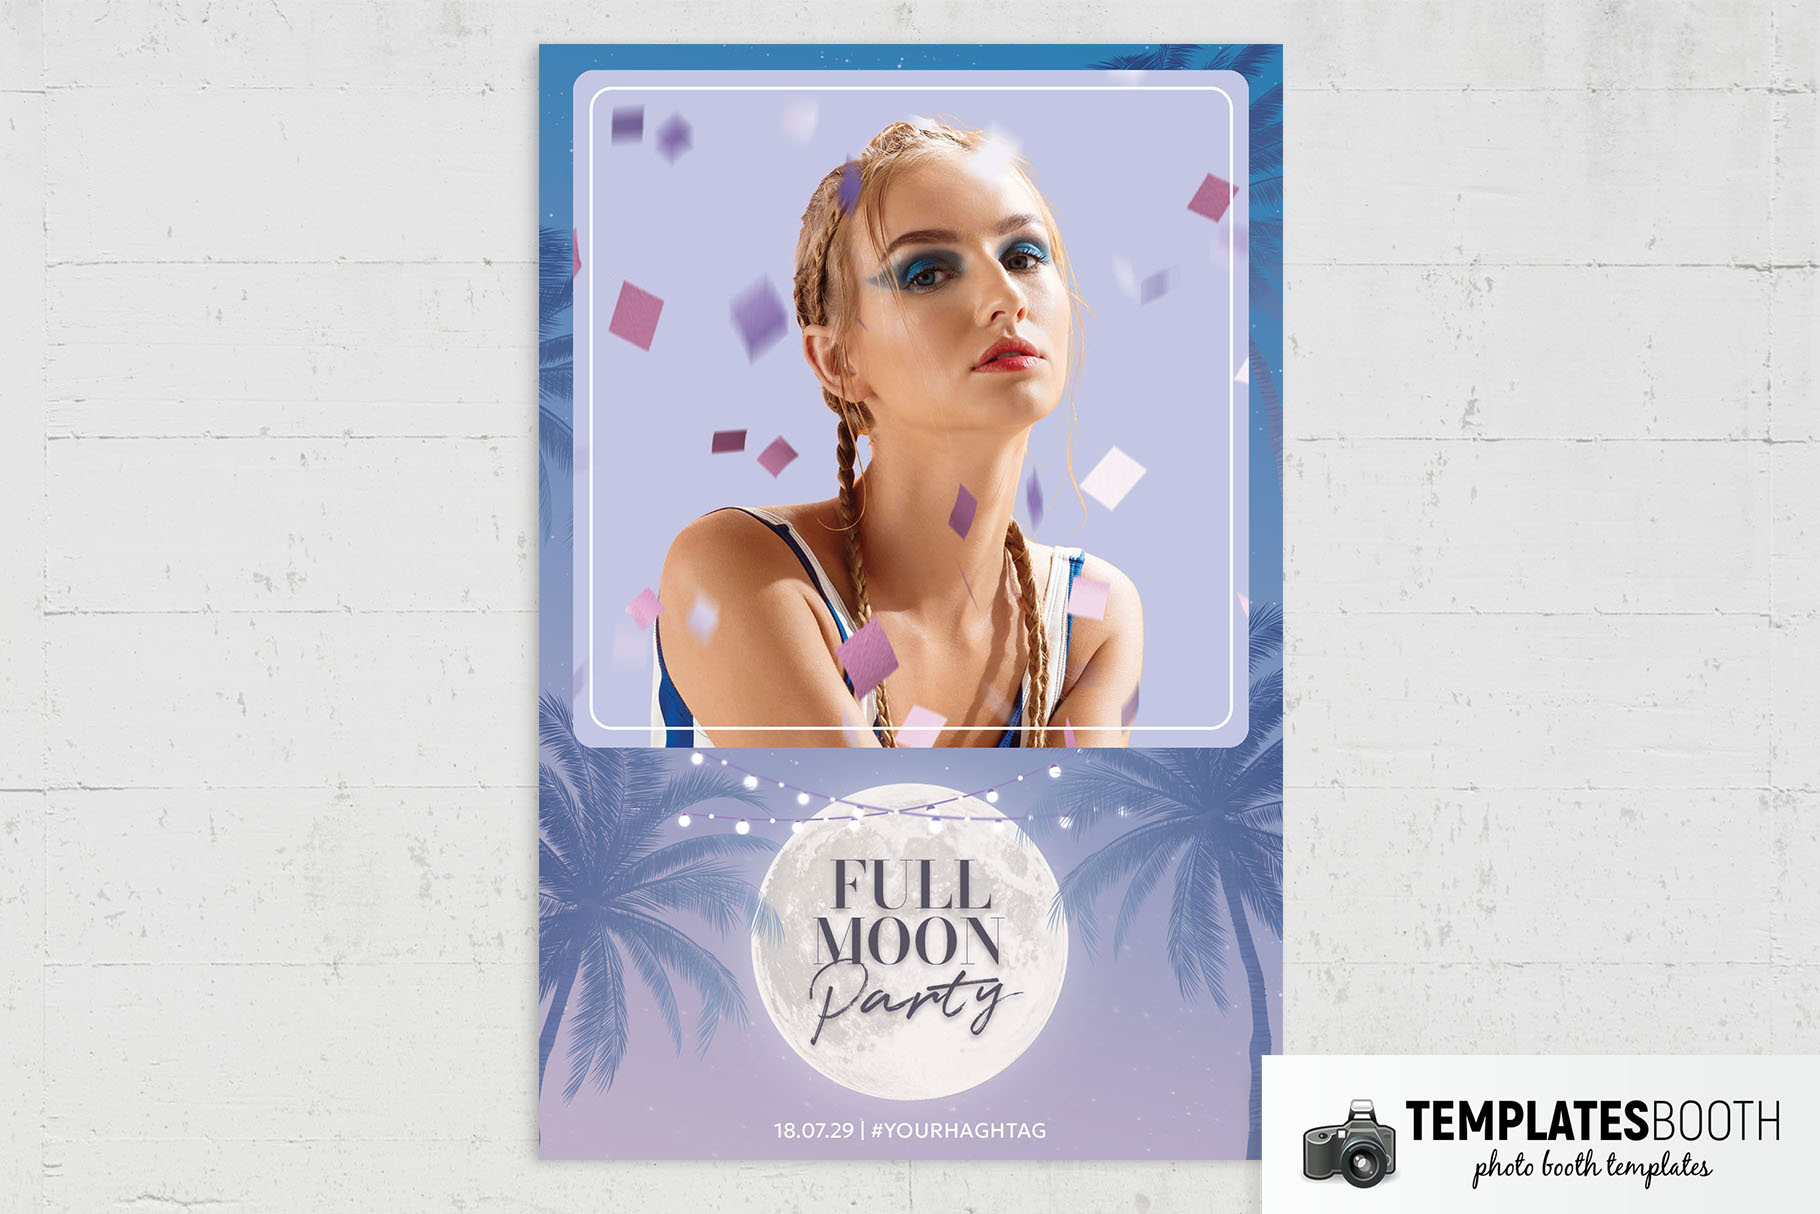 Full Moon Party Photo Booth Template